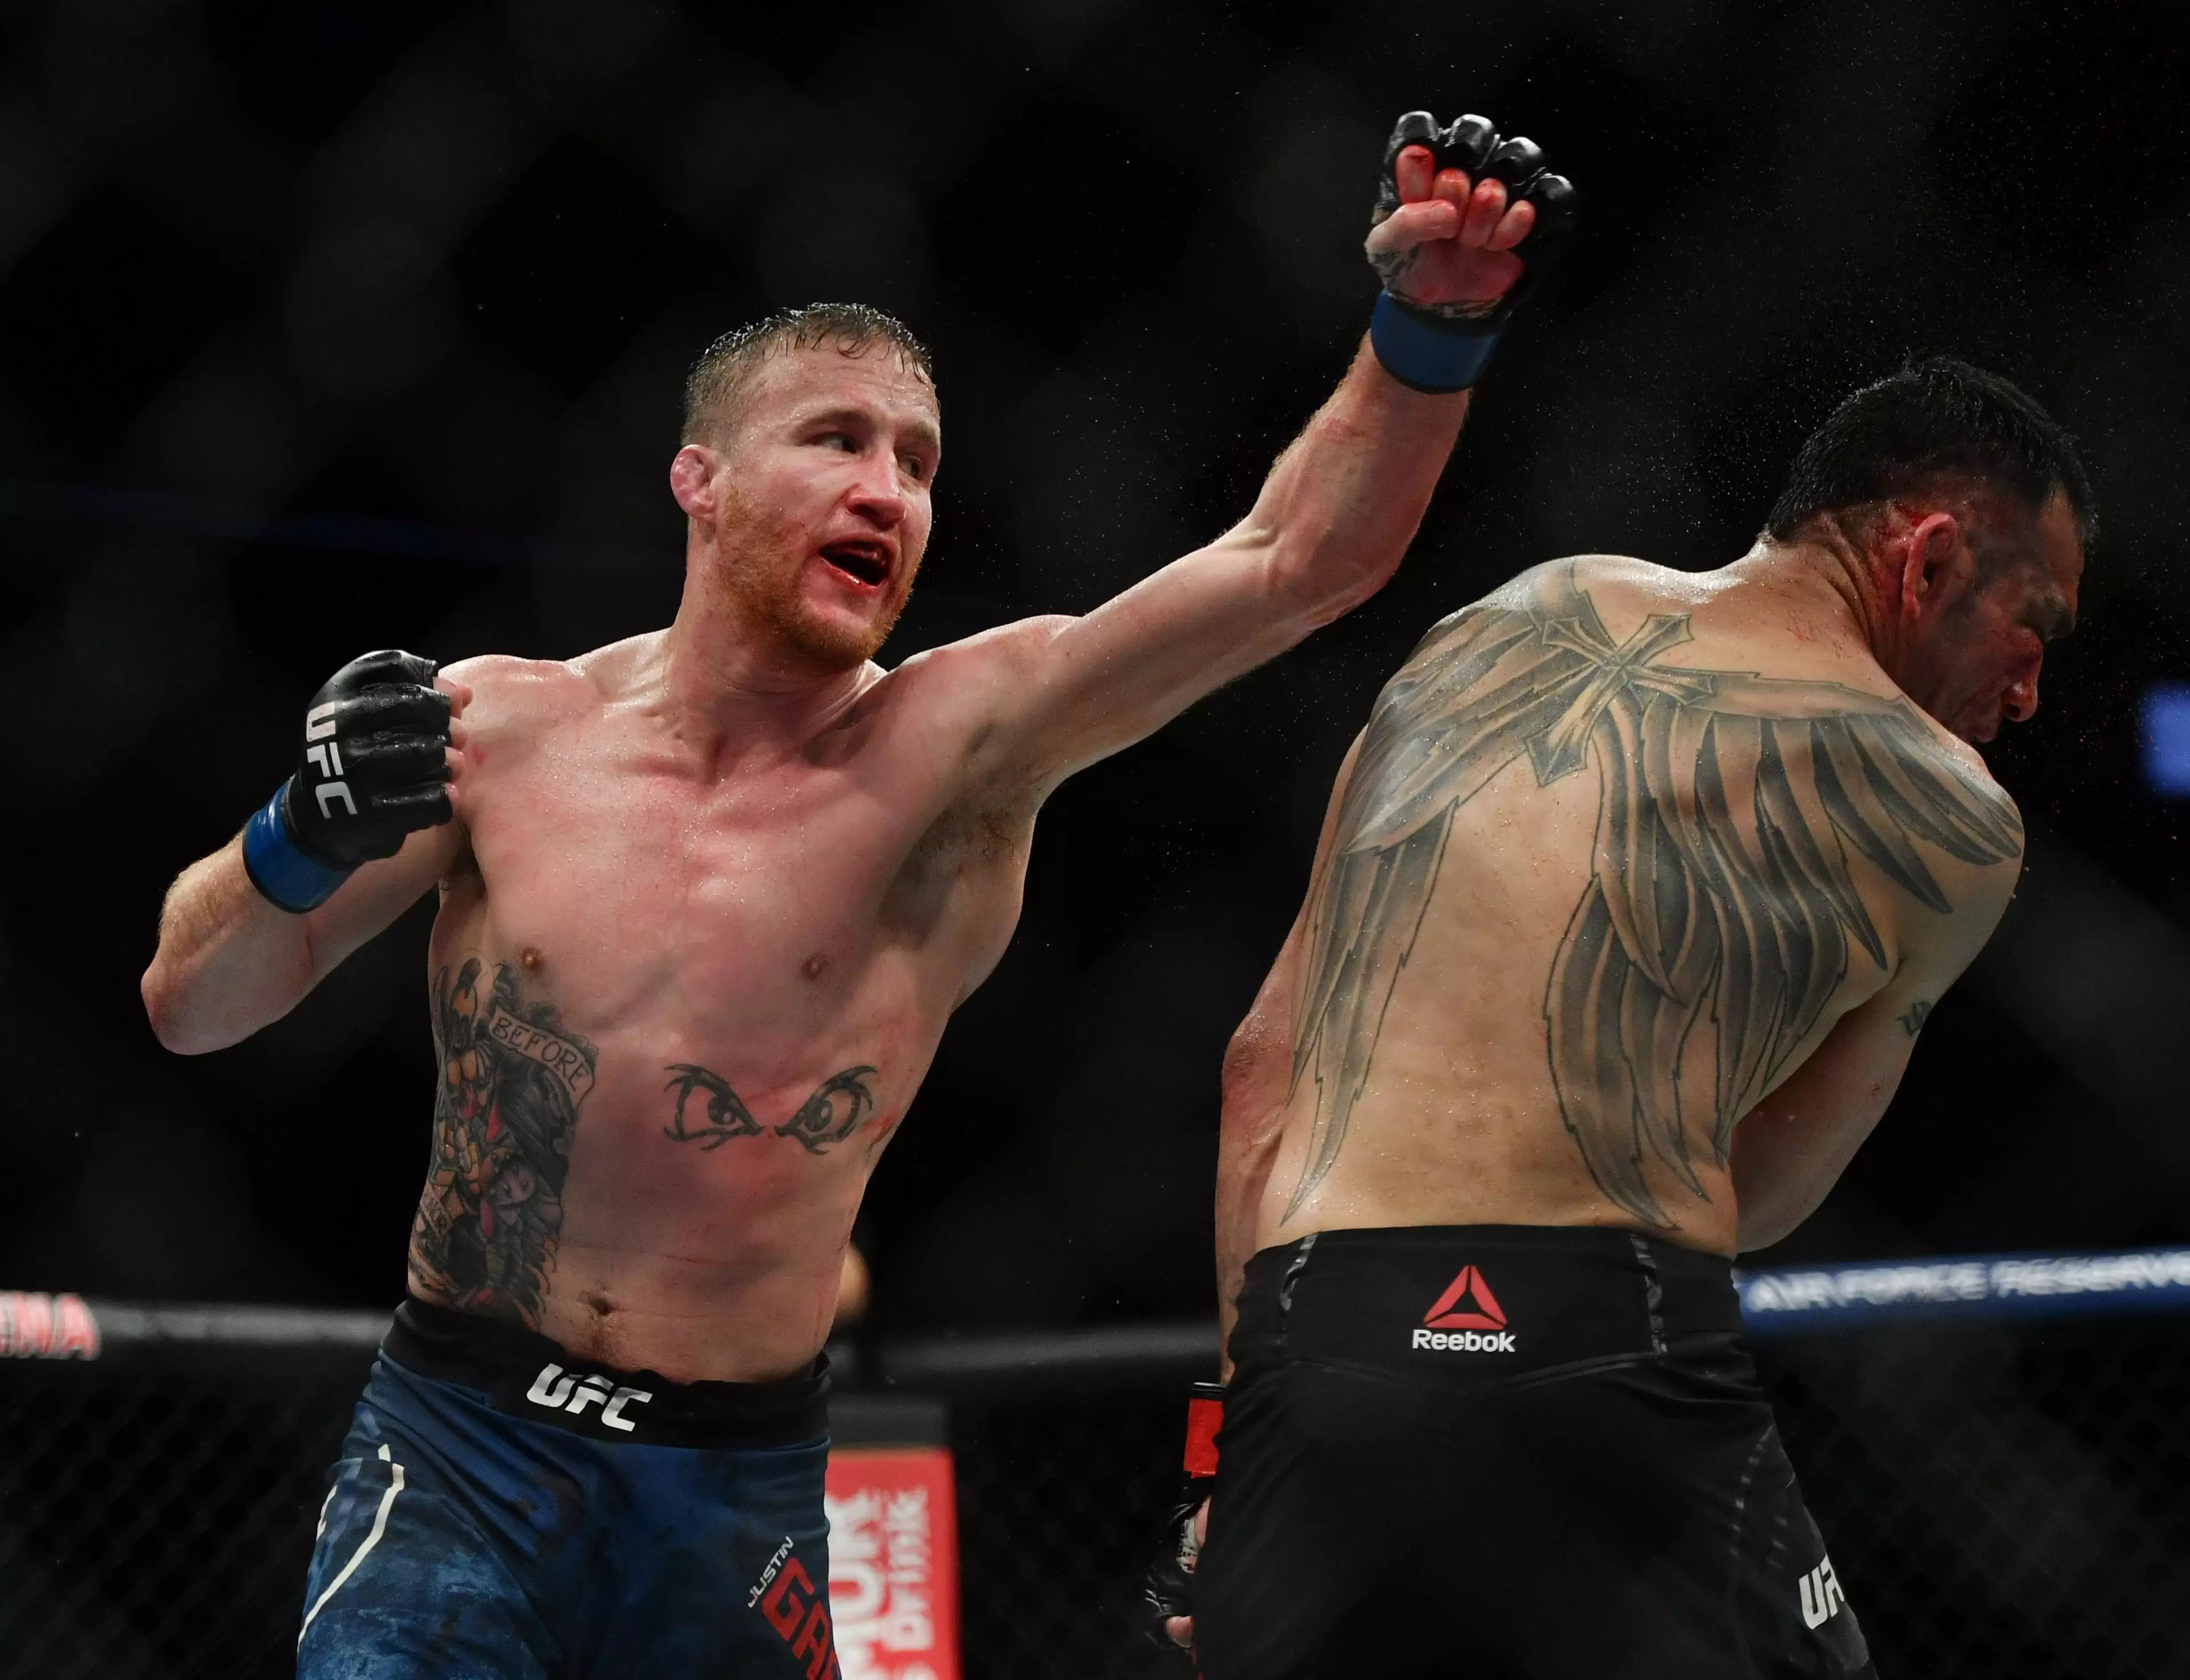 Gaethje was brilliant in his brutal win over Ferguson at UFC 249. Image: PA Images